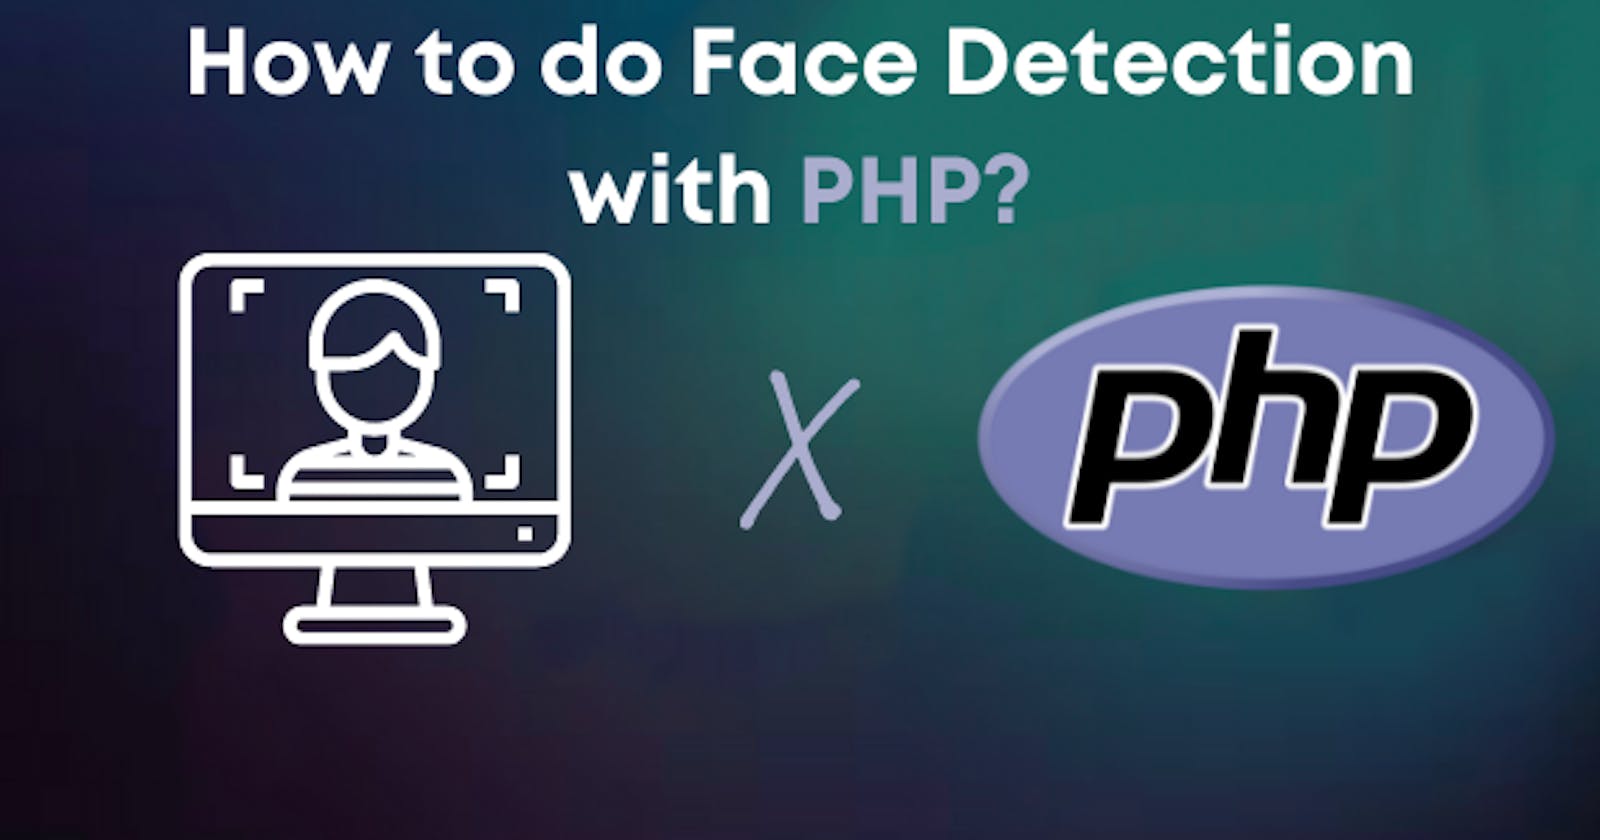 How to do Face Detection with PHP?